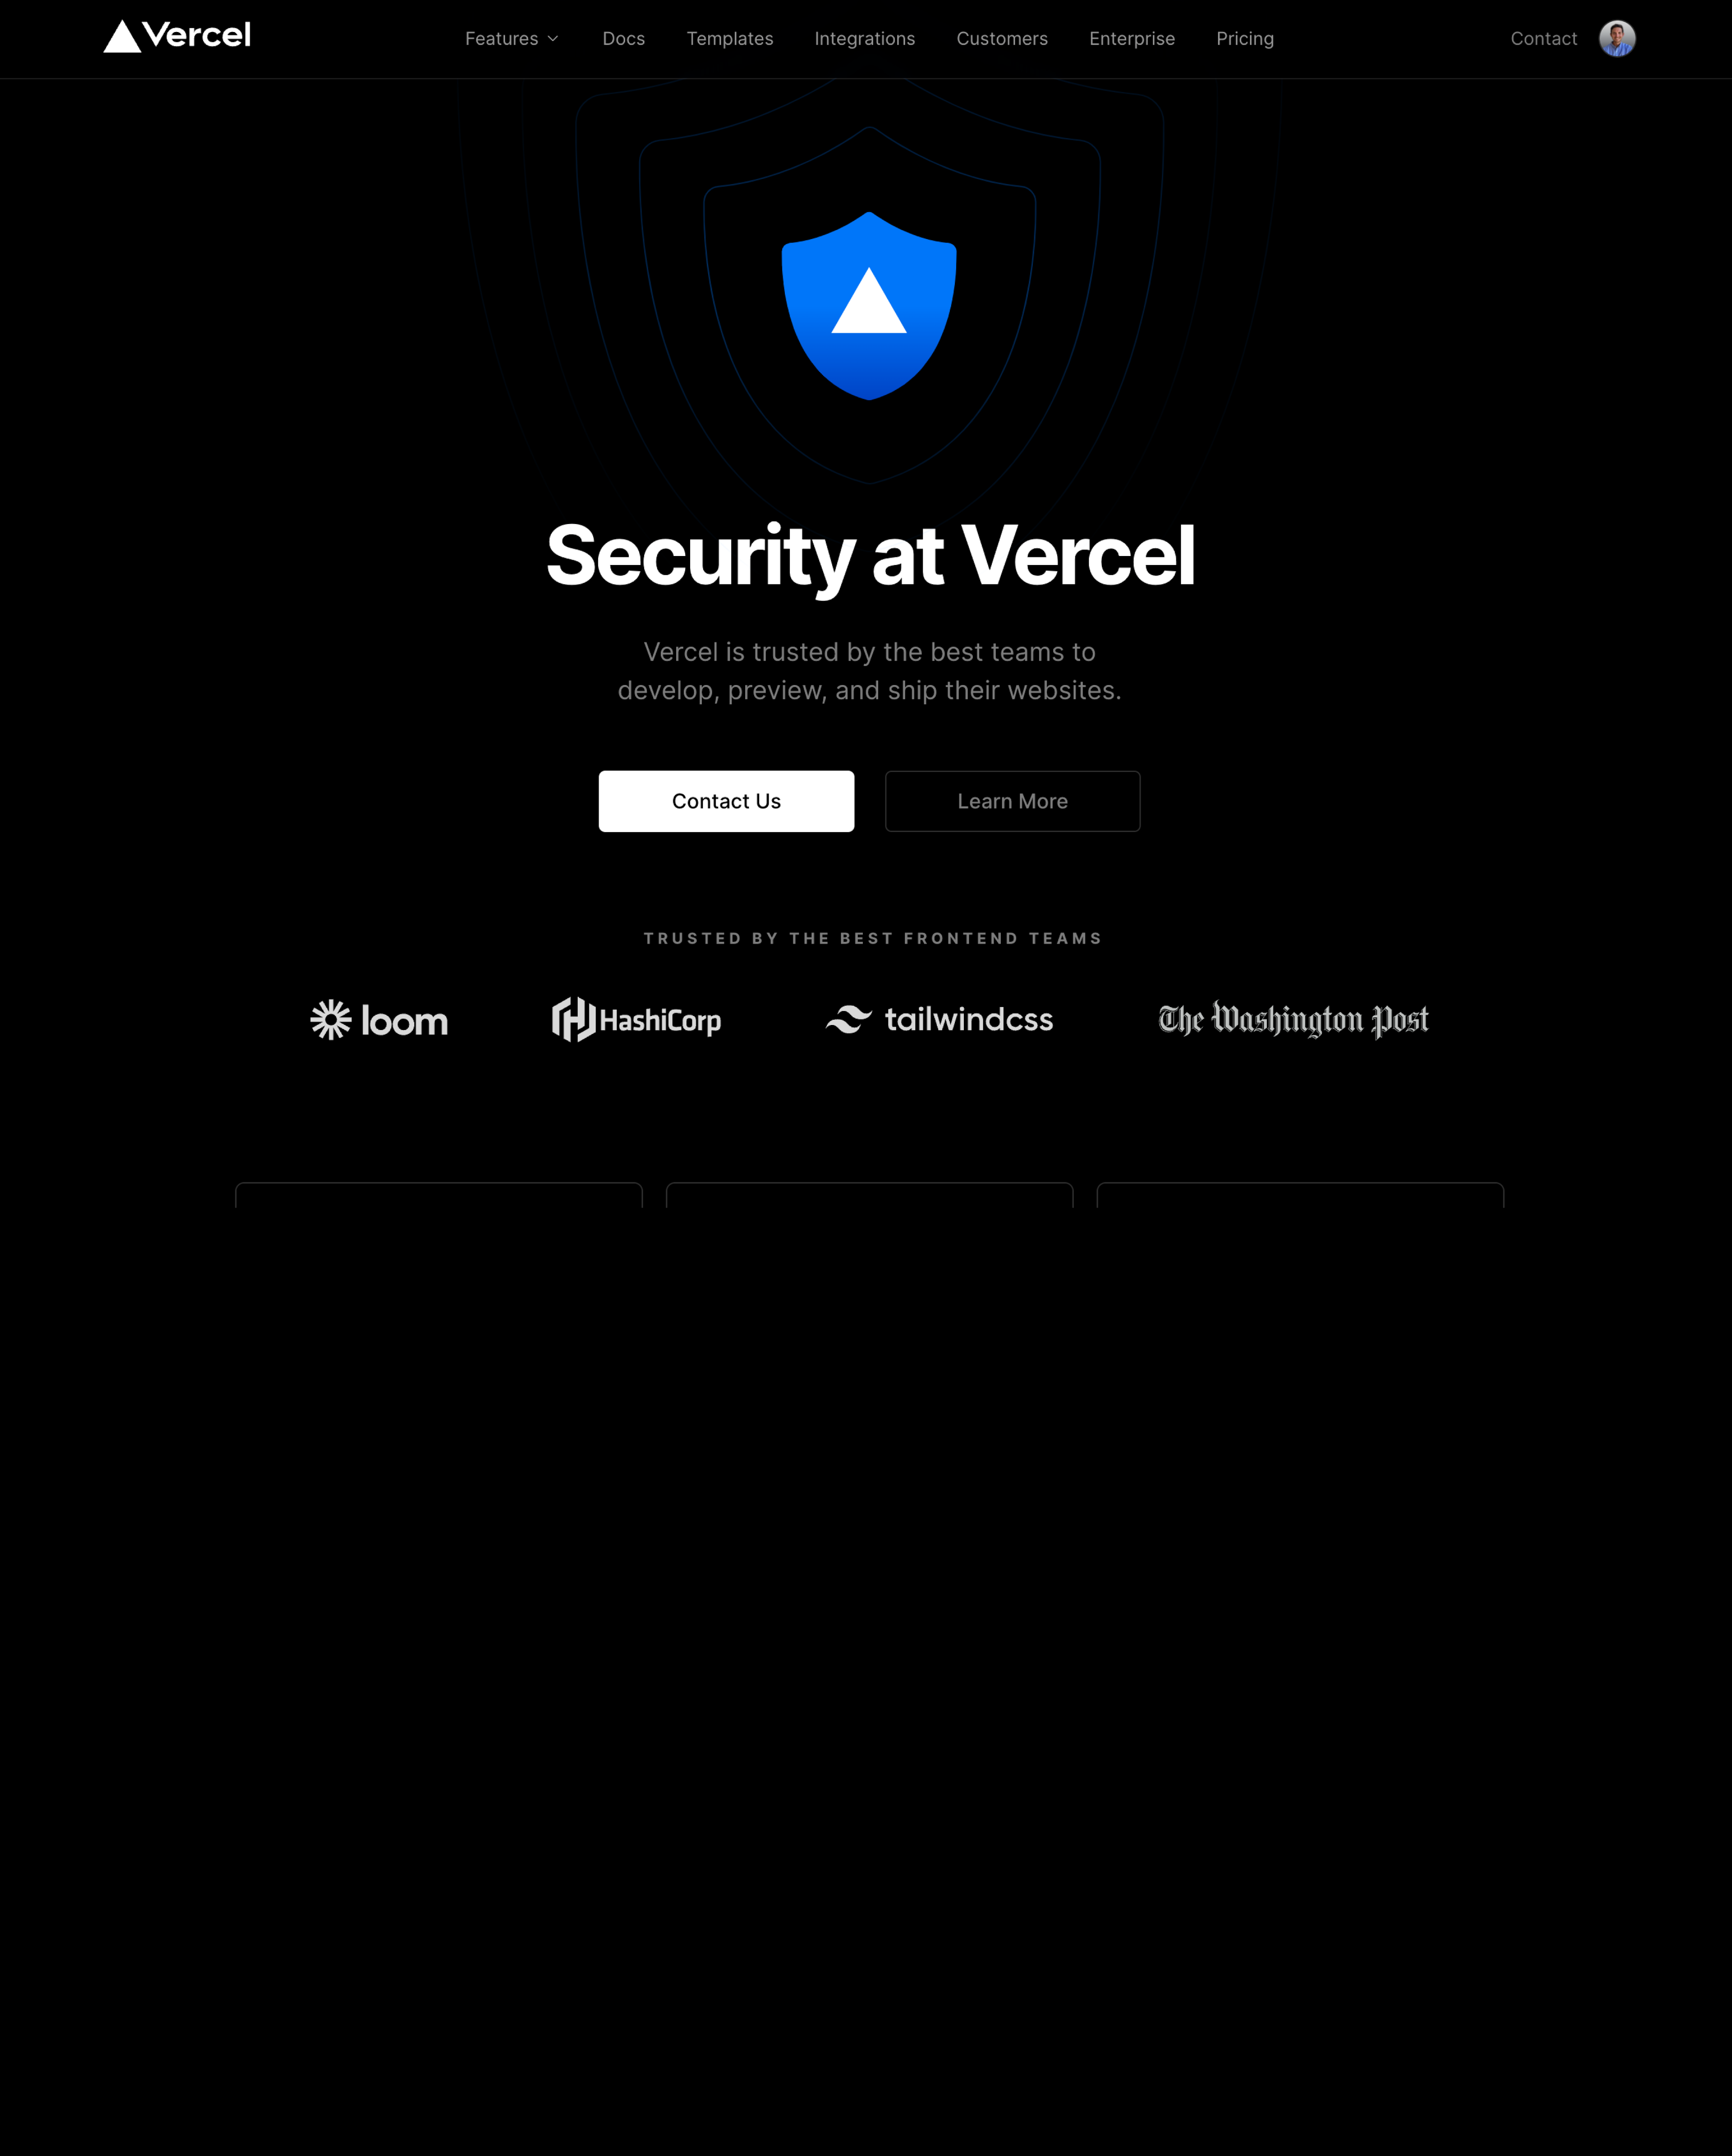 Vercel's investment in a secure web